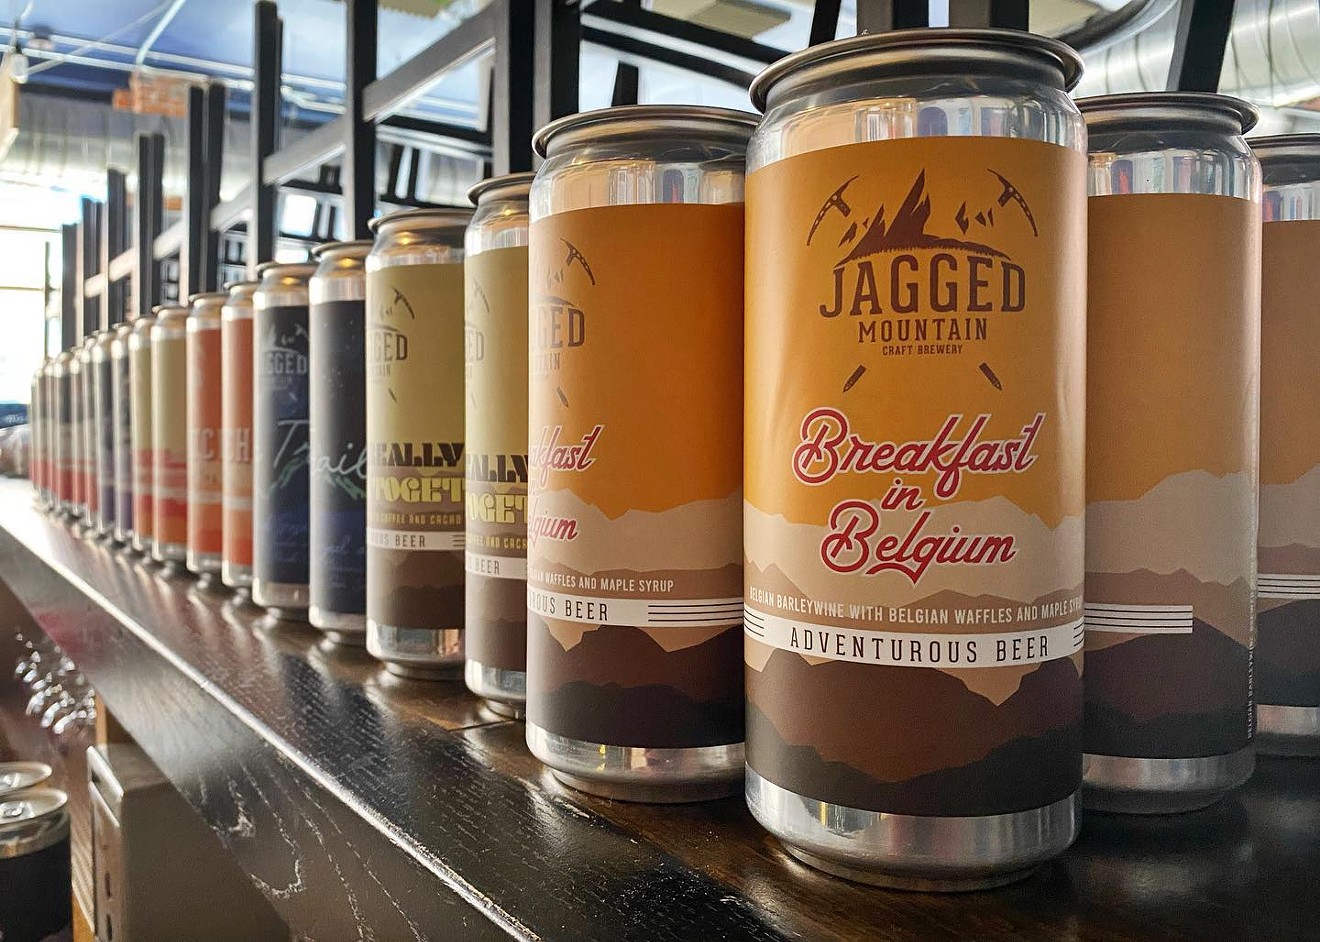 Jagged Mountain Craft Brewery is one of dozens in Denver.